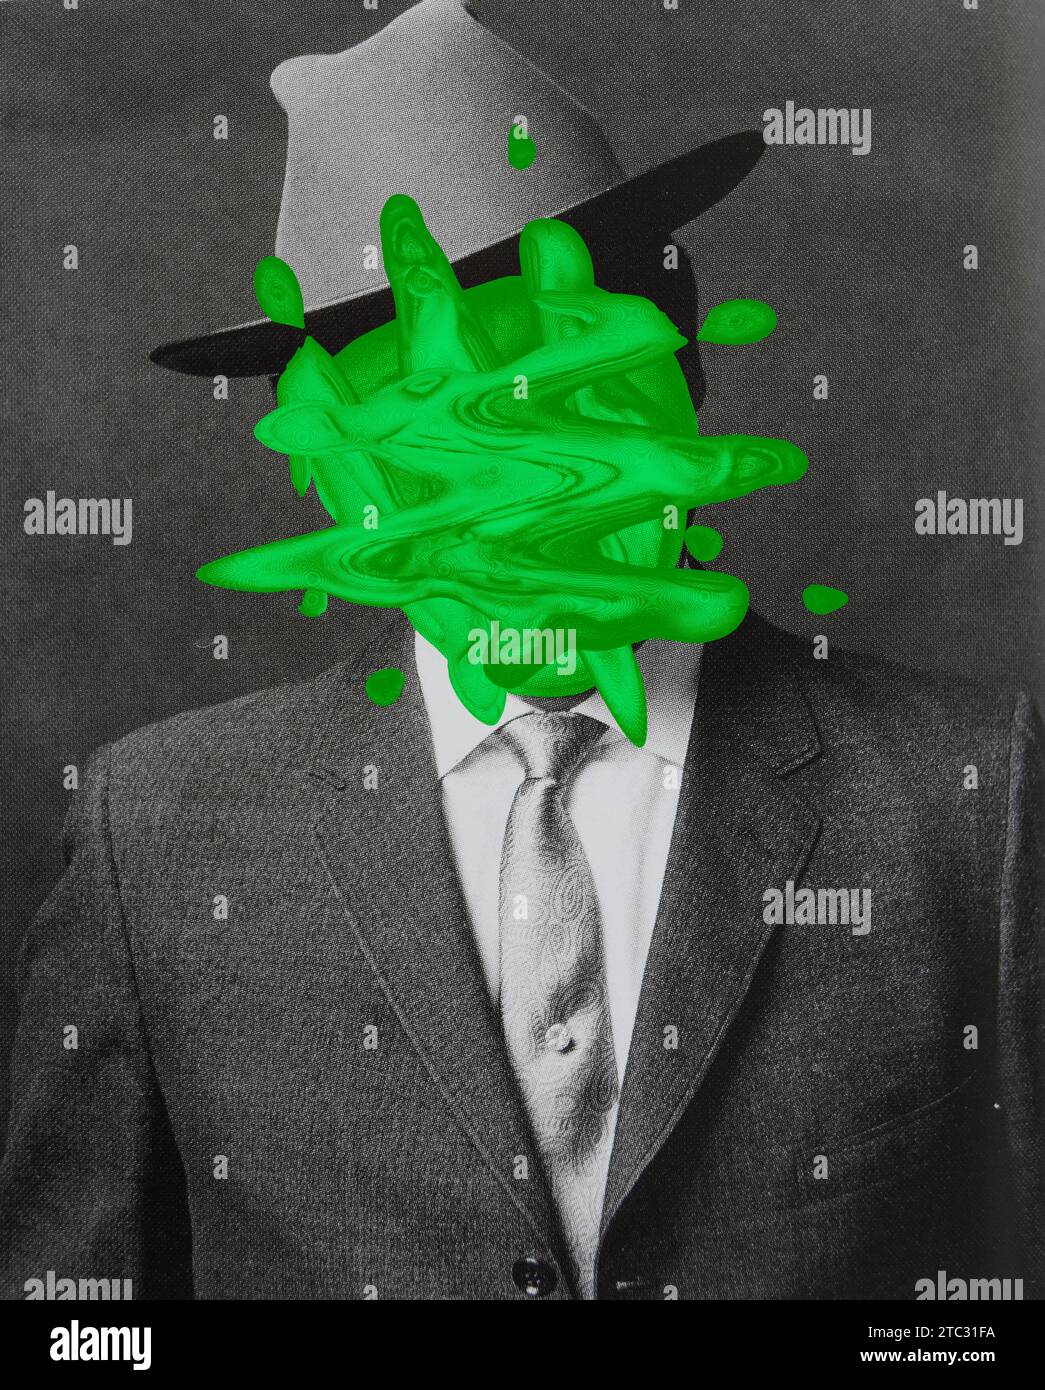 Black and white portrait of someone wearing a jacket, tie and hat. Green liquid stain on the face. Stock Photo